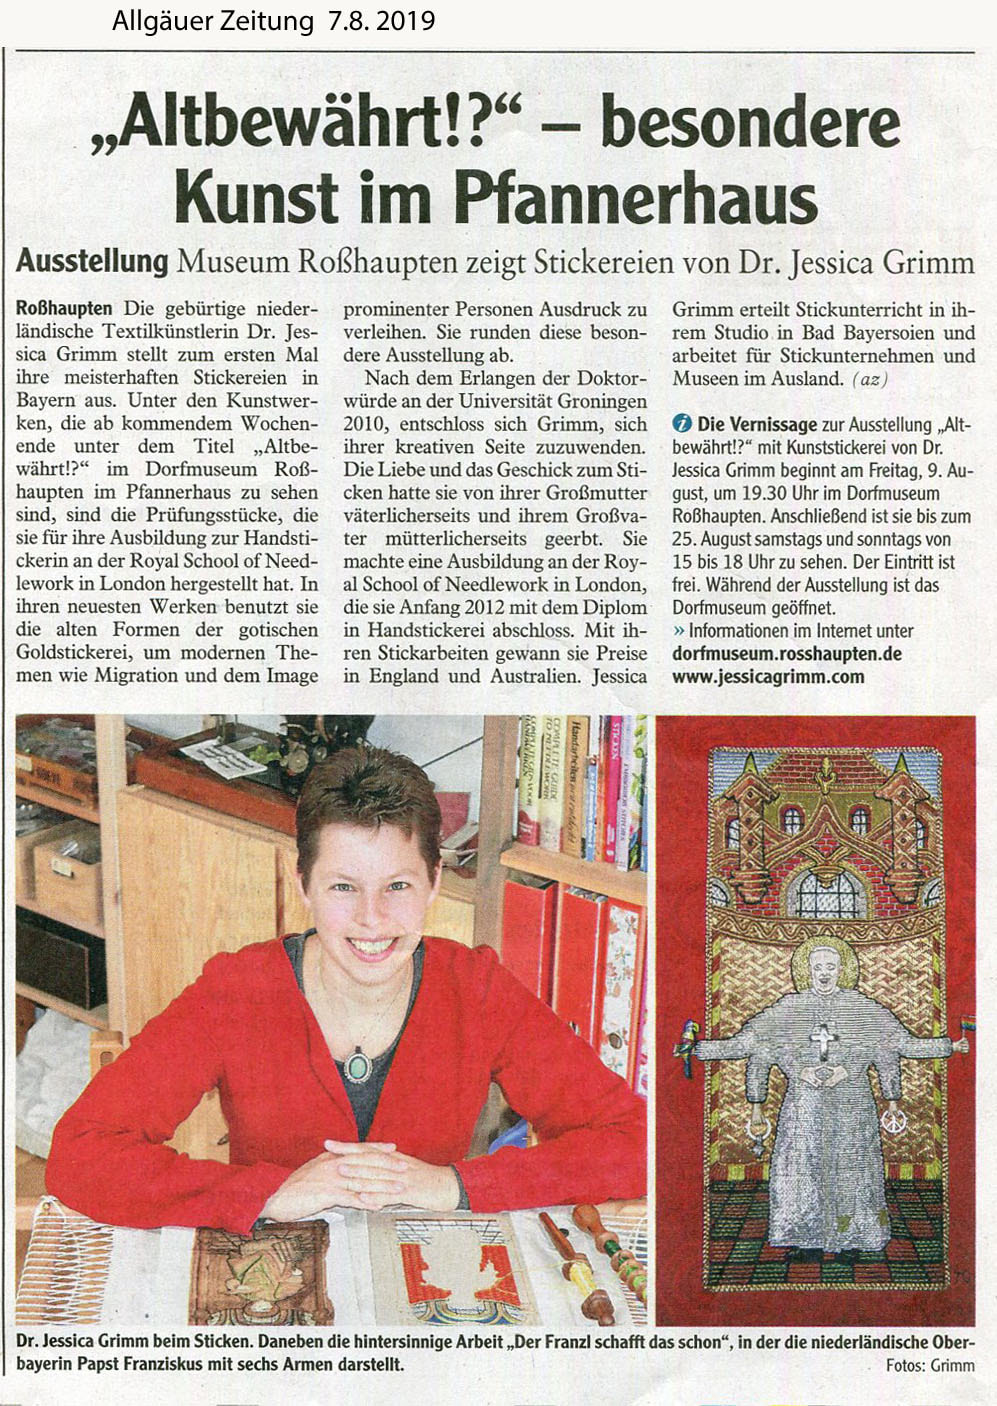 Newspaper article art embroidery exhibition Roßhaupten